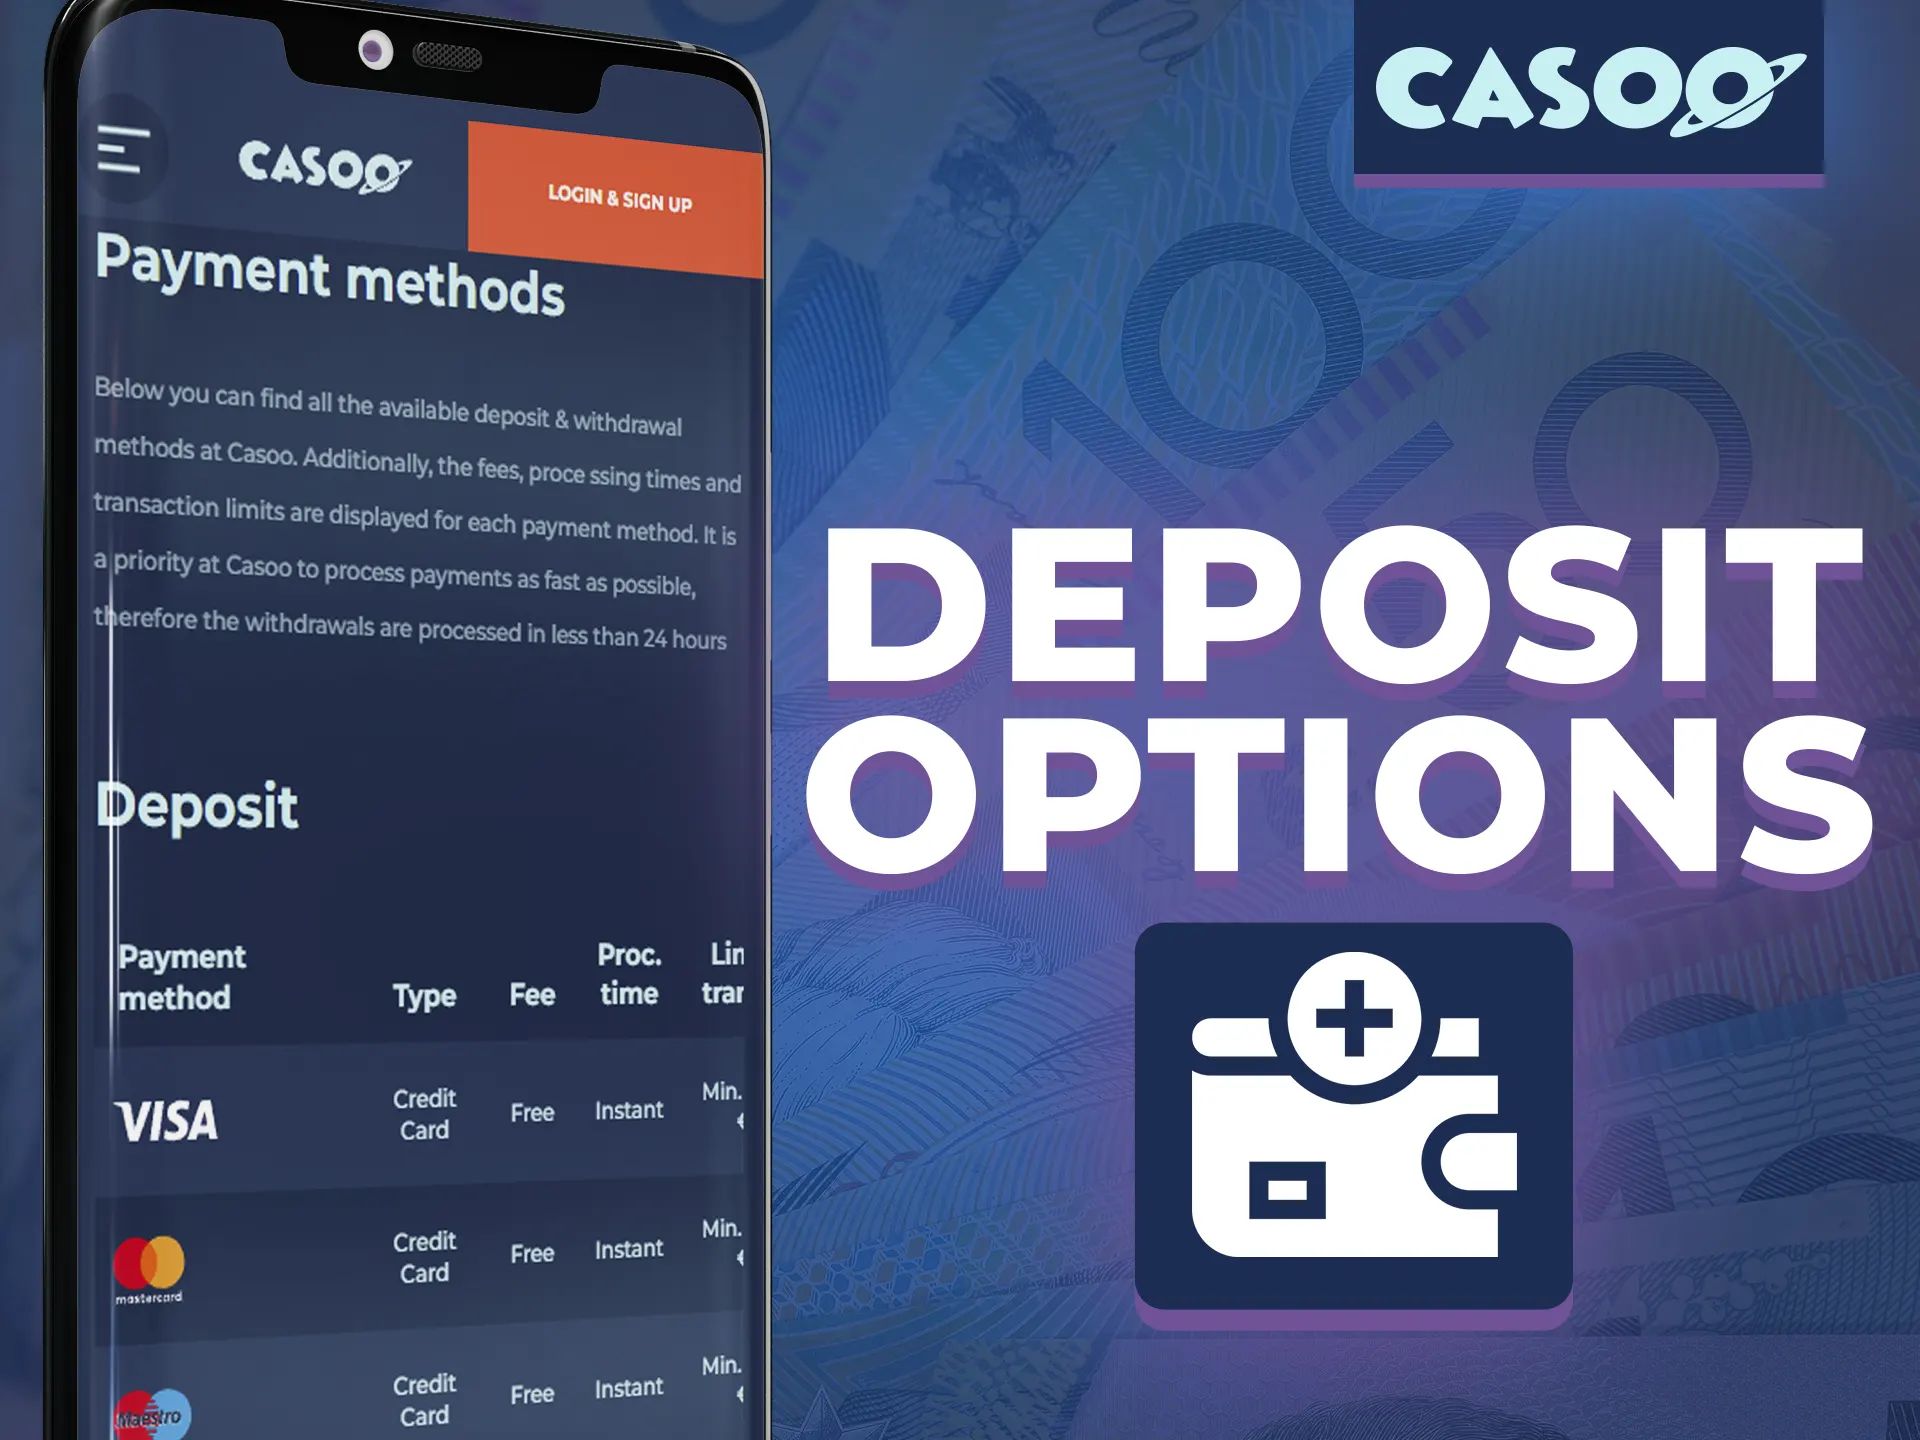 At Casoo you have access for a big number of deposit options.